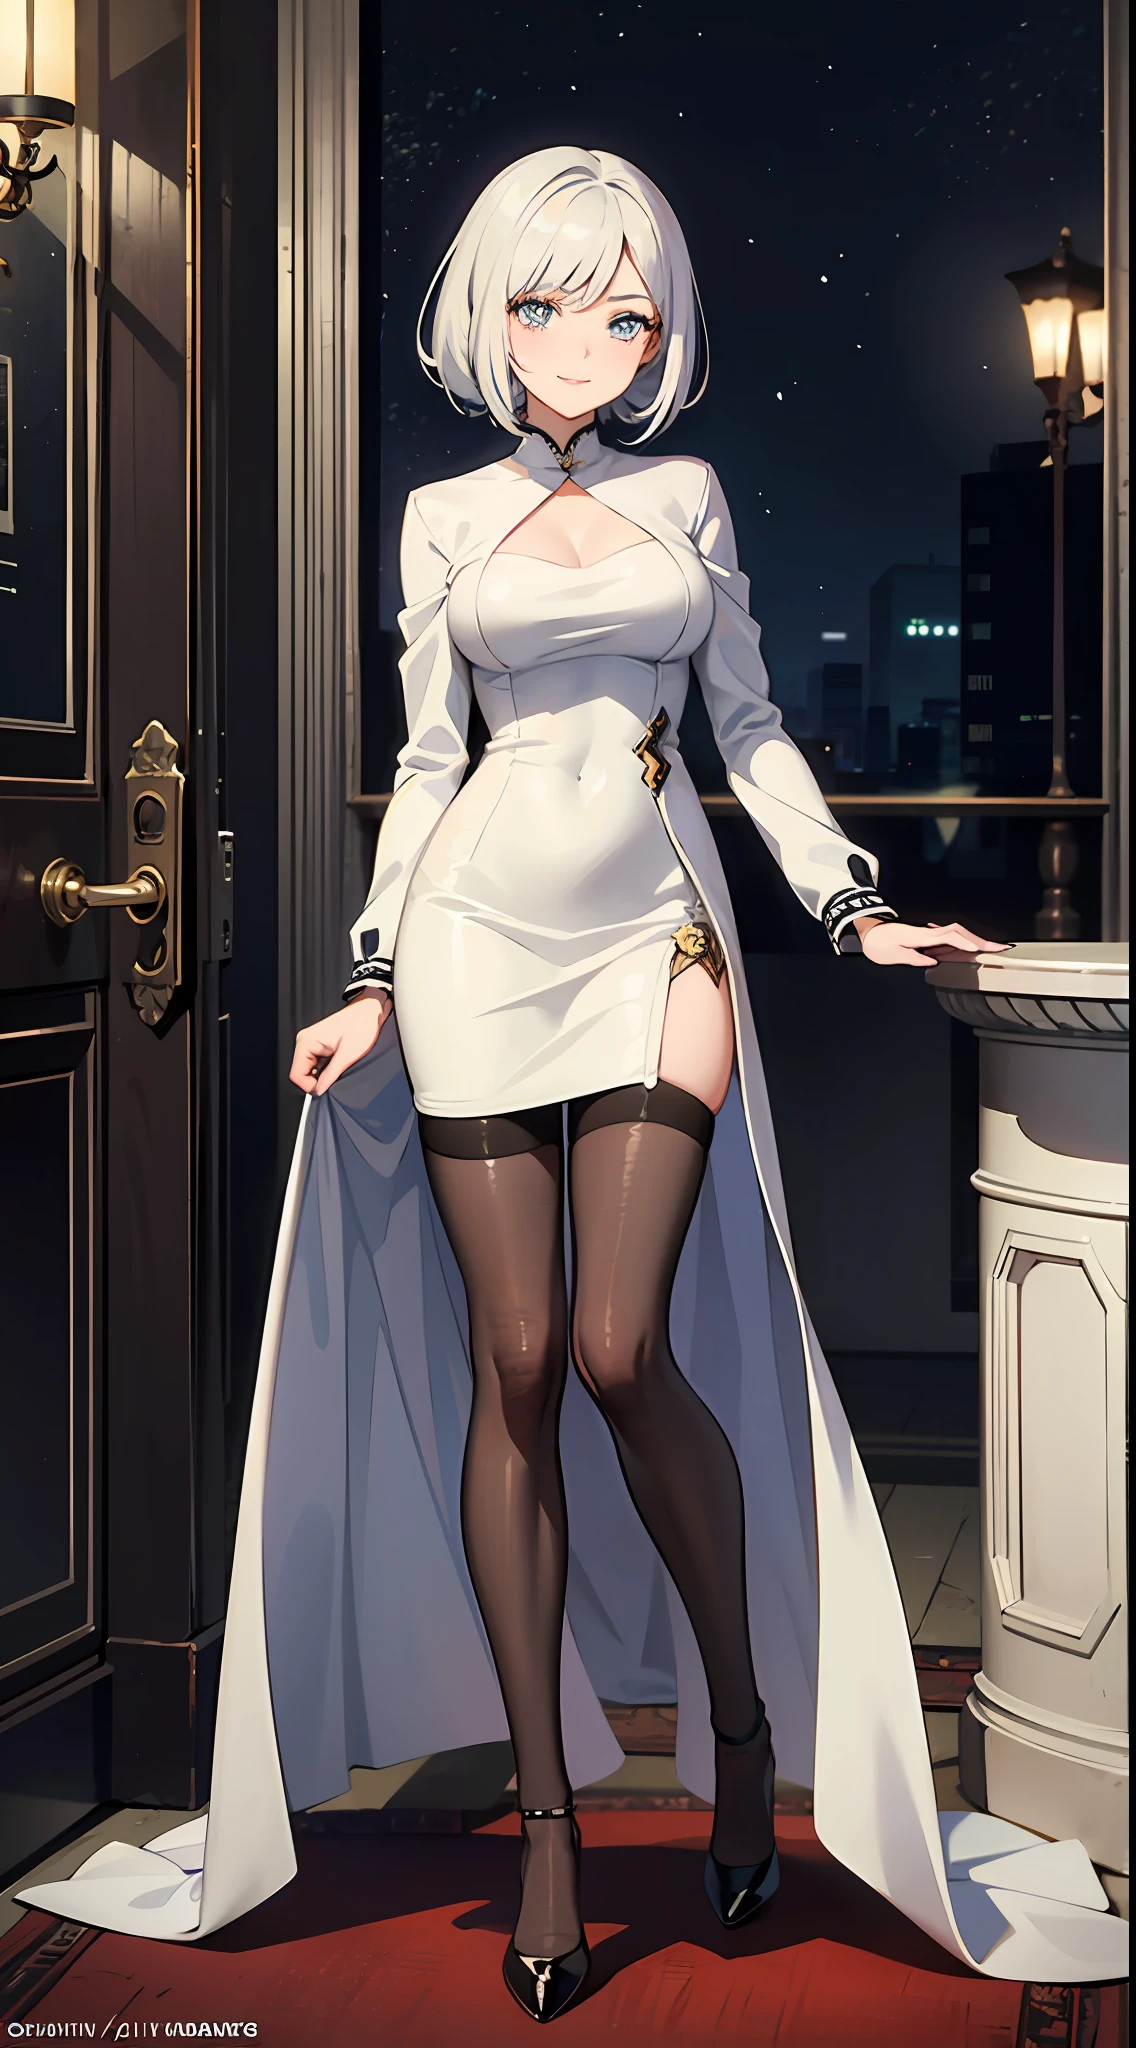 "A stylish and confident anime woman in a beautiful white long-sleeved business dress matched along with black stockings and heels showcasing a full body art. She is in her early 20s and possesses the charm and charisma of a glamorous Digimon character and has glamorous short silver hair, smiling, with the essence of a captivating female anime character. The illustration captures her vibrant personality, she has a unique feminine style along with her petiteness. The setting is inside of a gorgeous mansion."